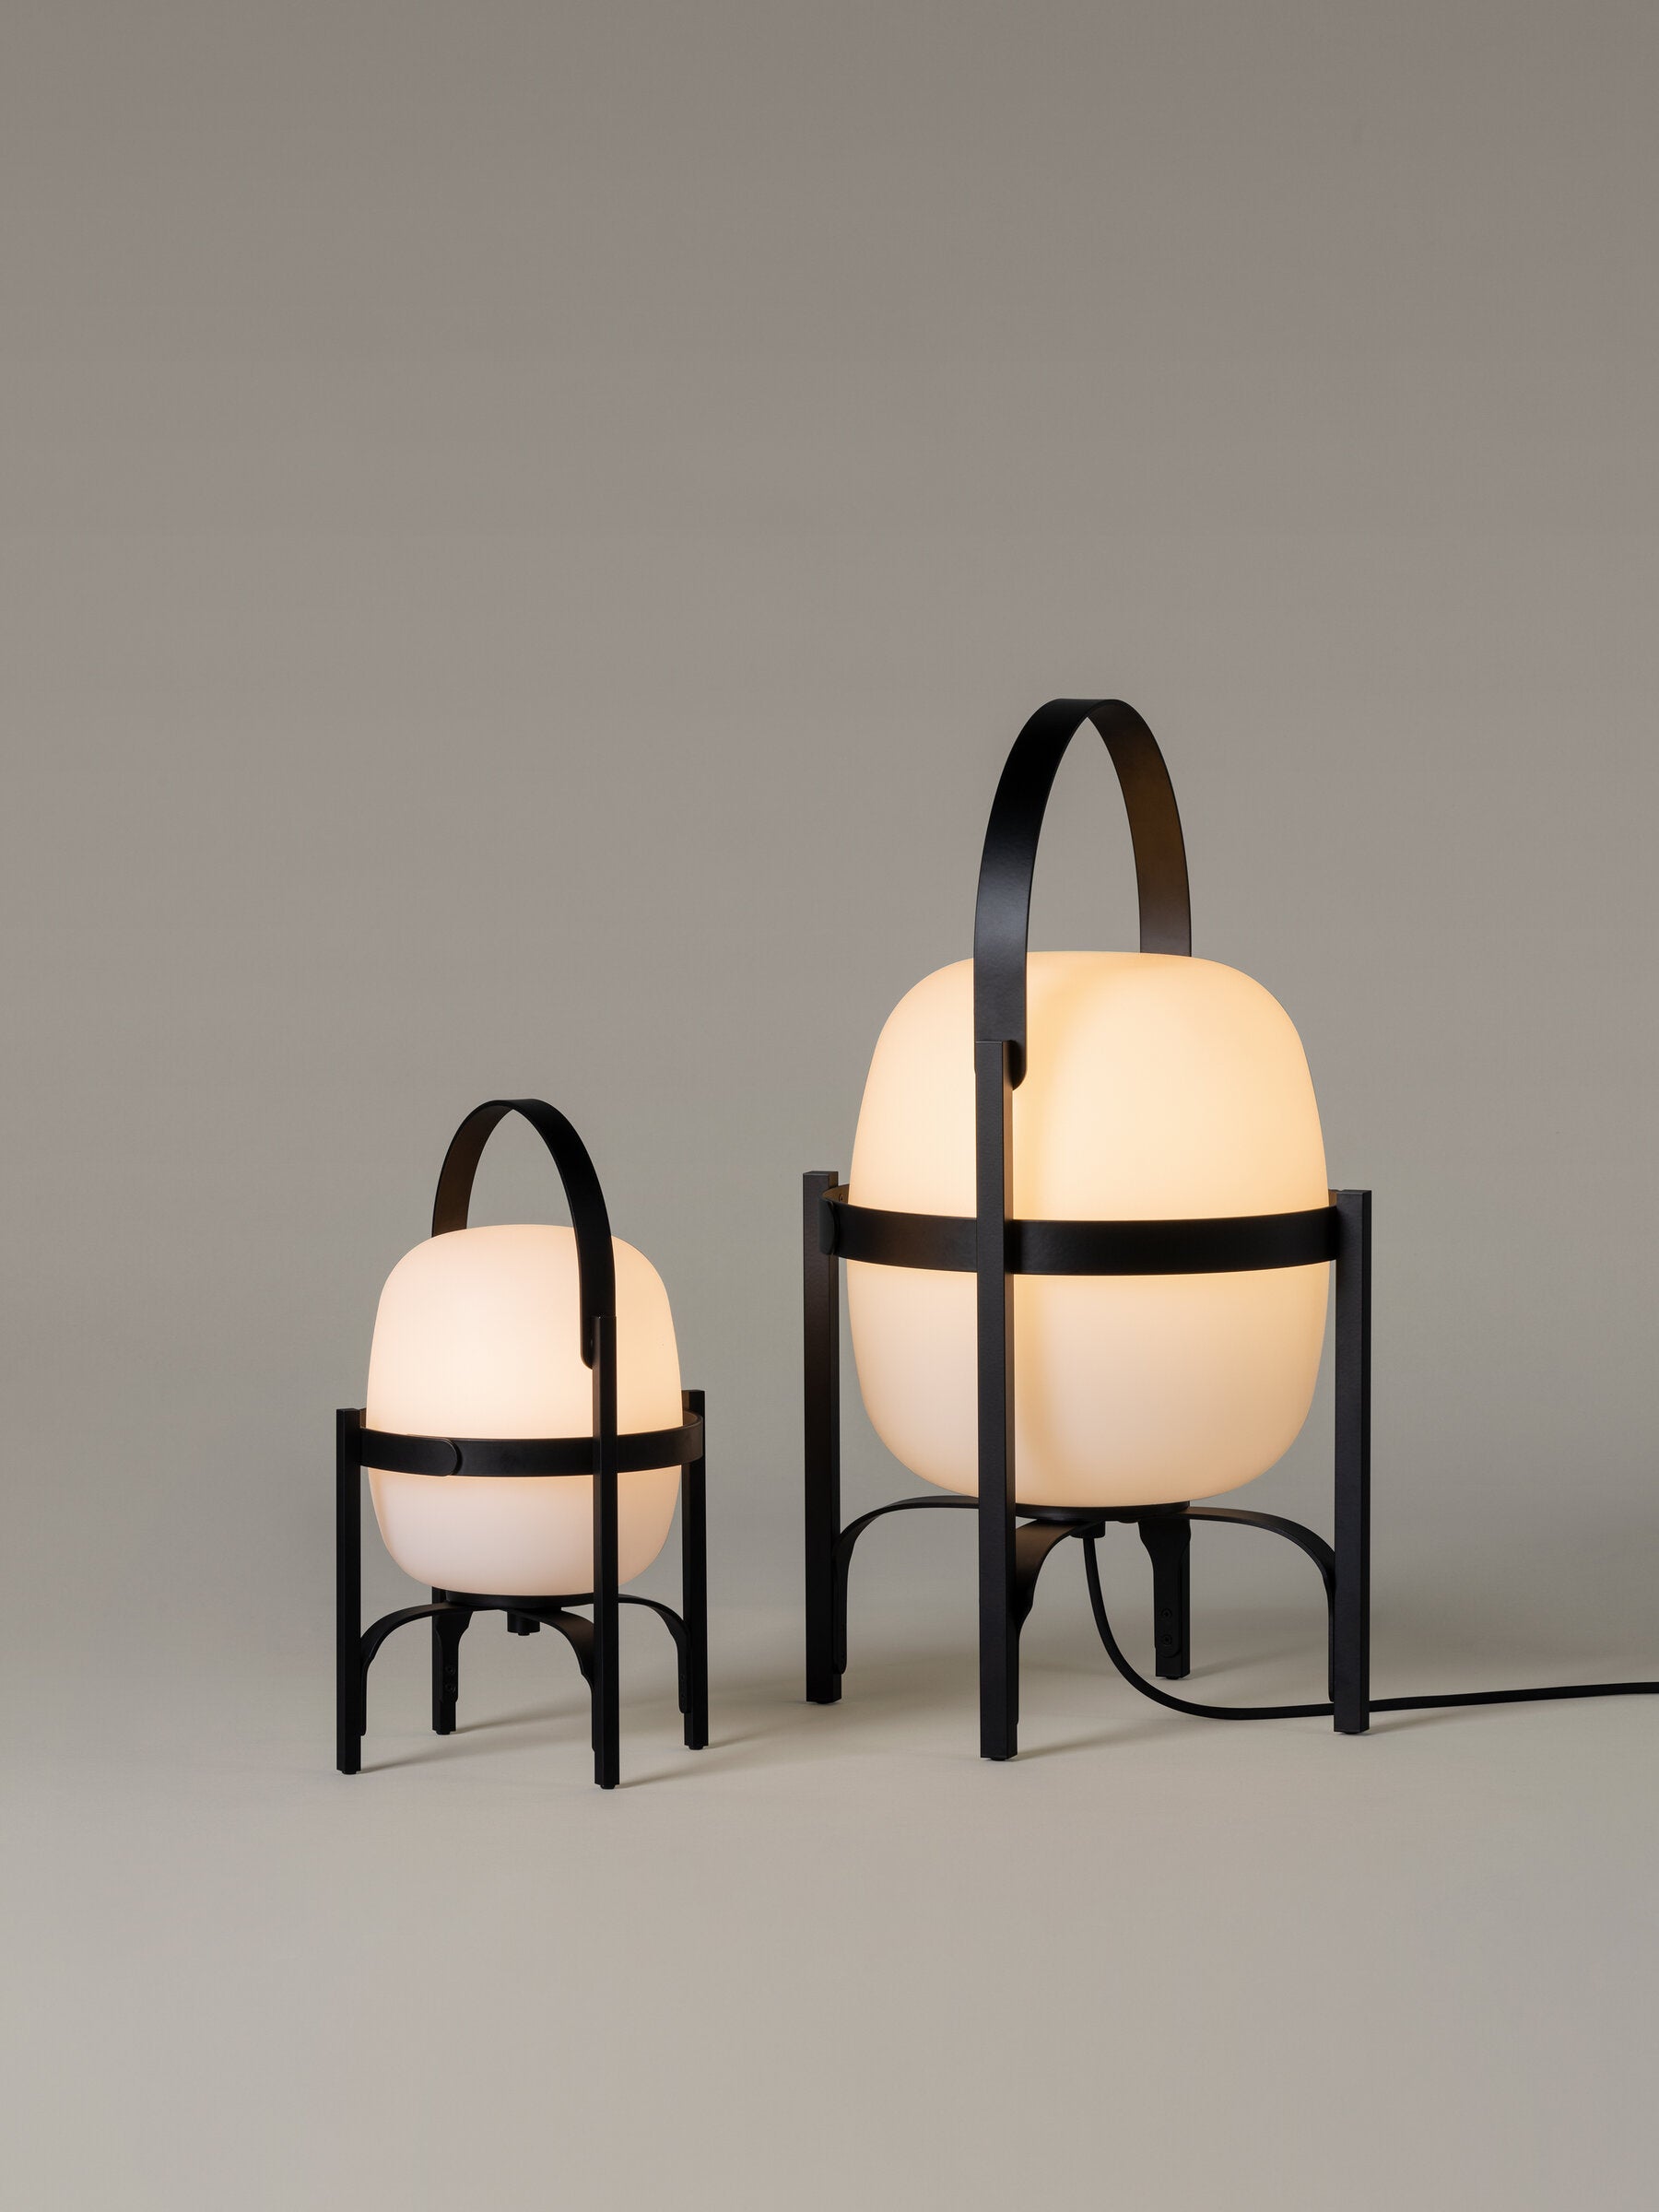 Santa and Cole Cesta Lamp: Timeless Elegance for Outdoors